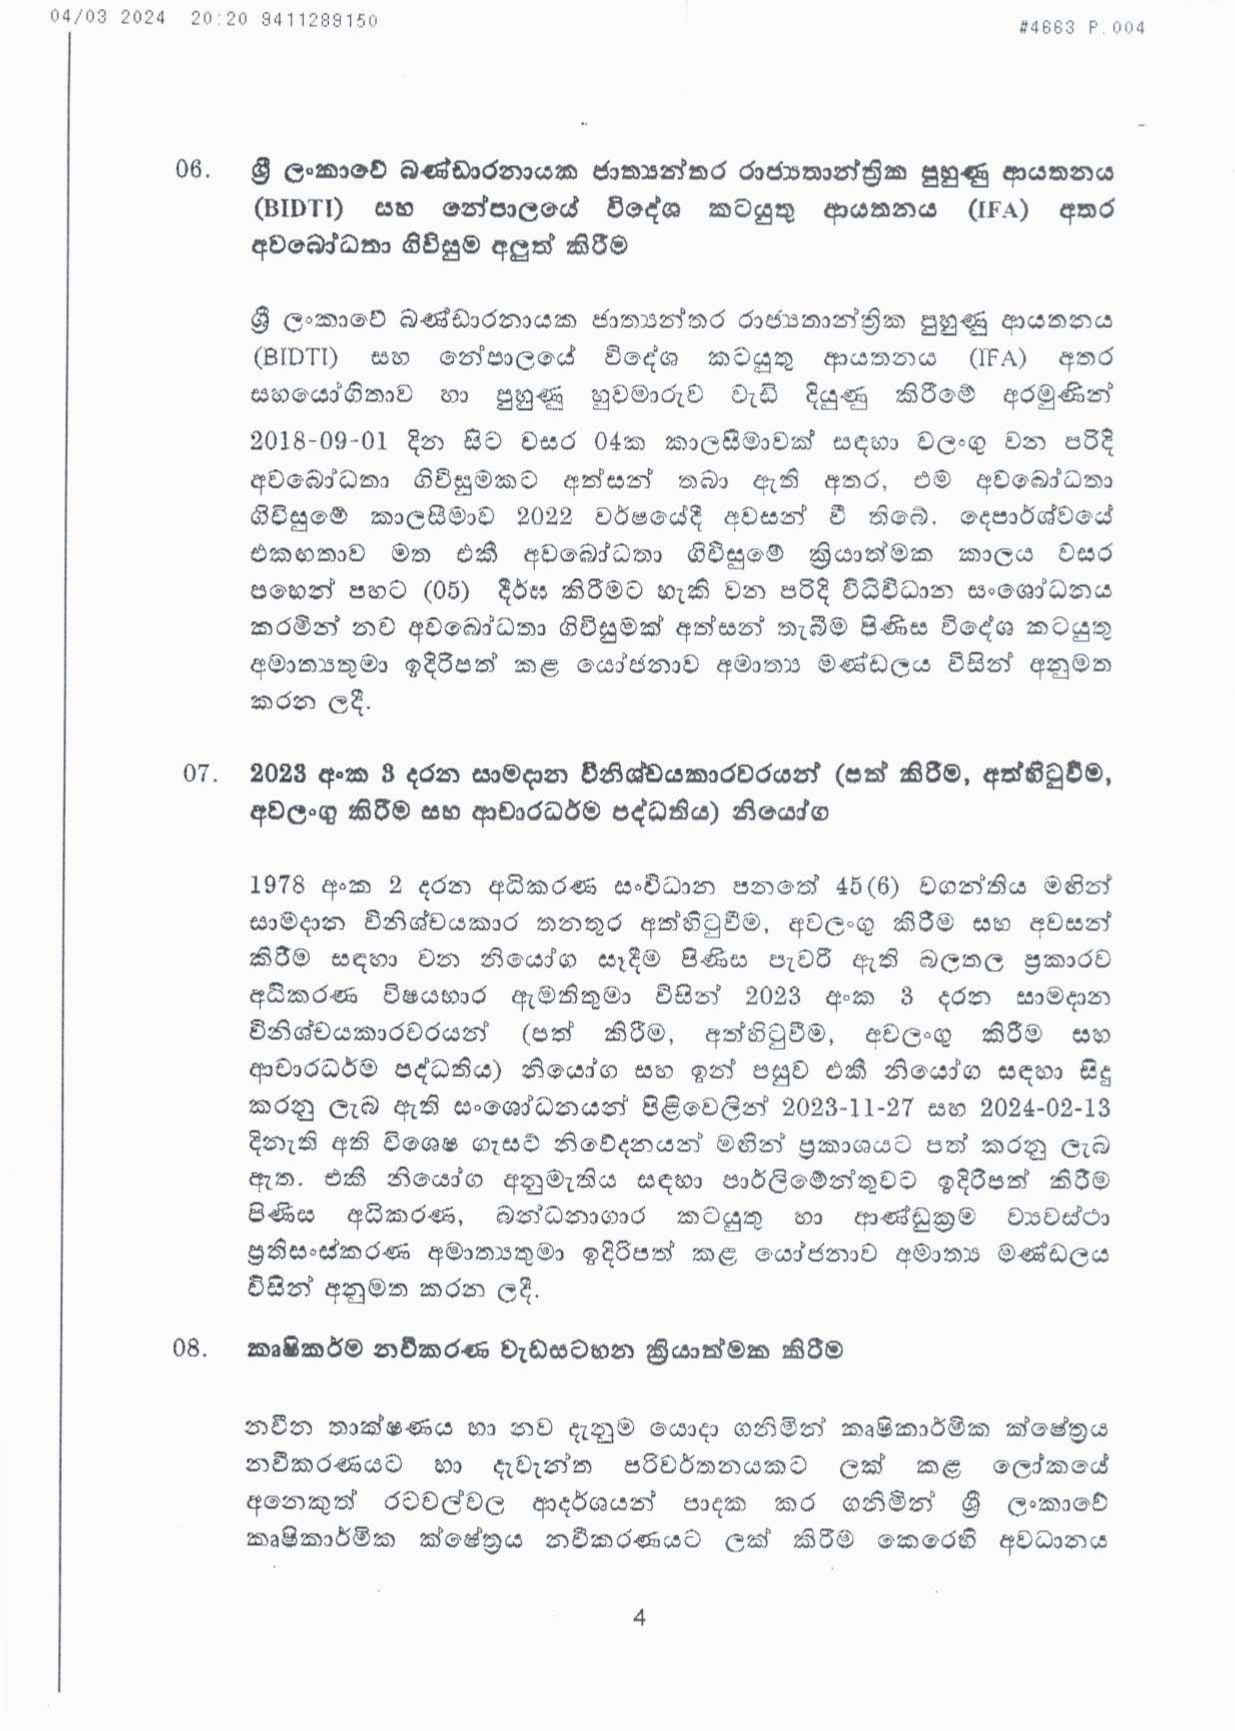 Cabinet Decision on 04.03.2024 page 0004